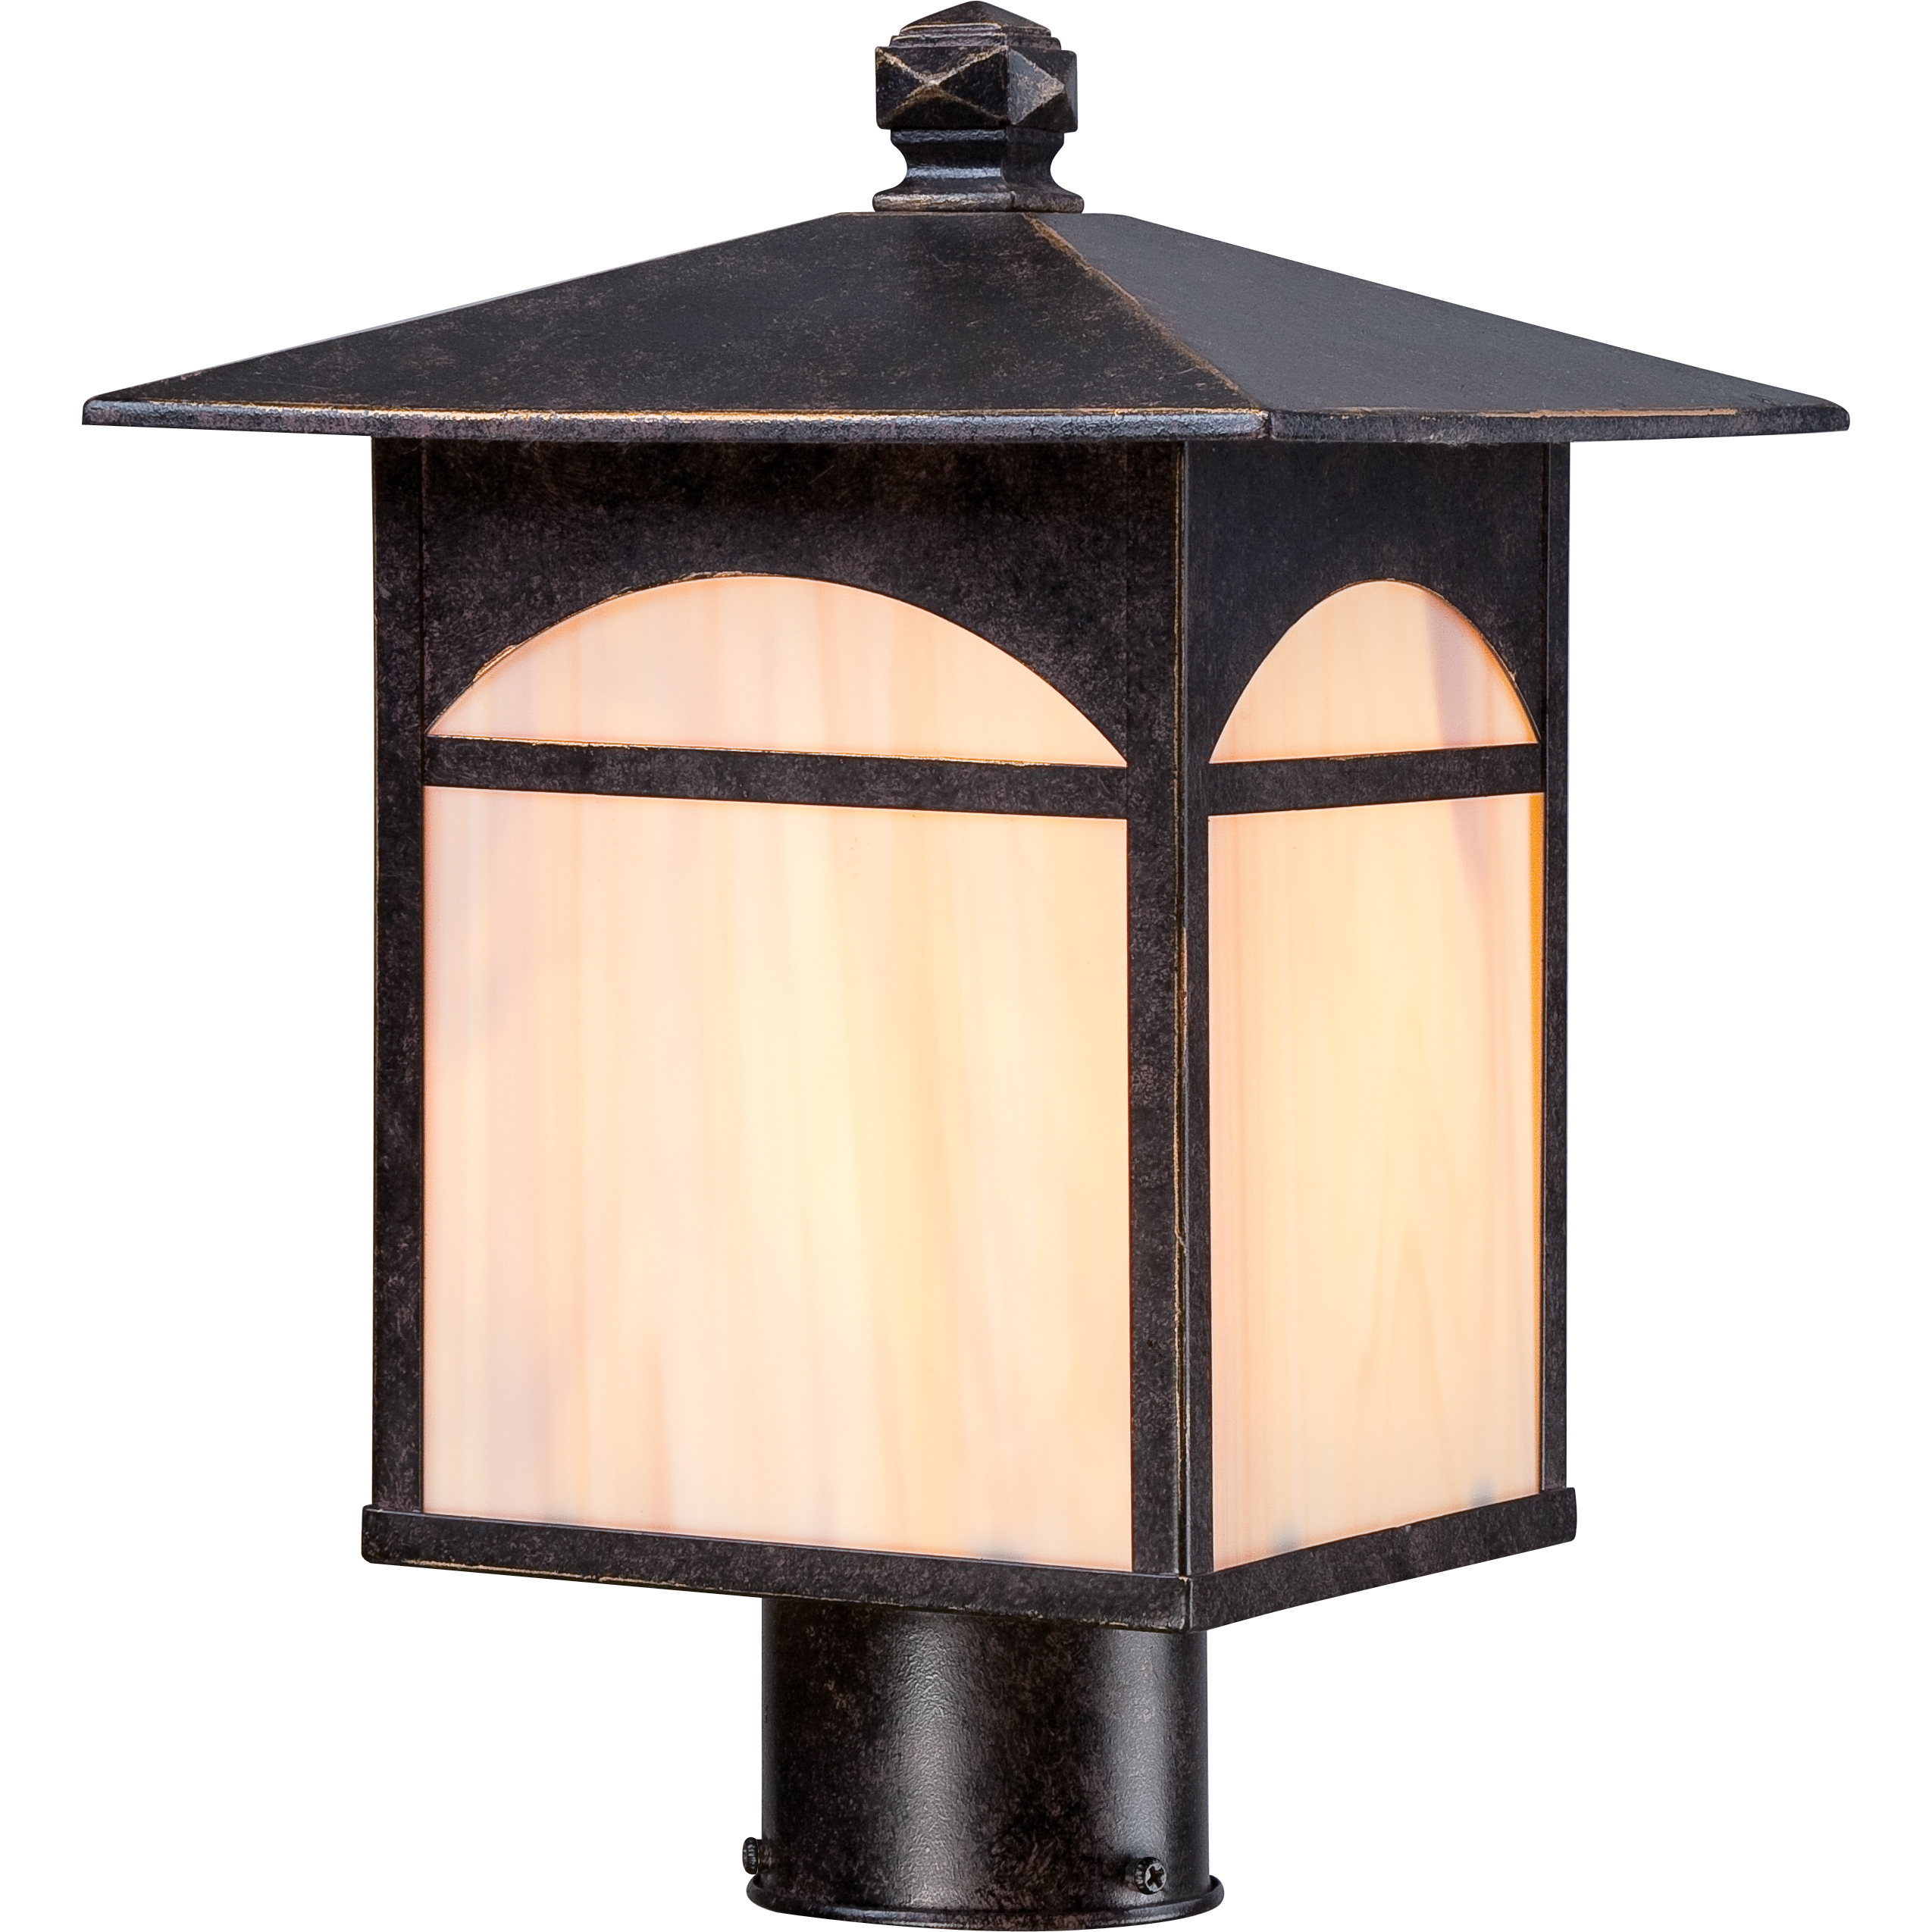 Nuvo 60/5655 Canyon 1 Light 13 inch Umber Bronze Outdoor Post Light